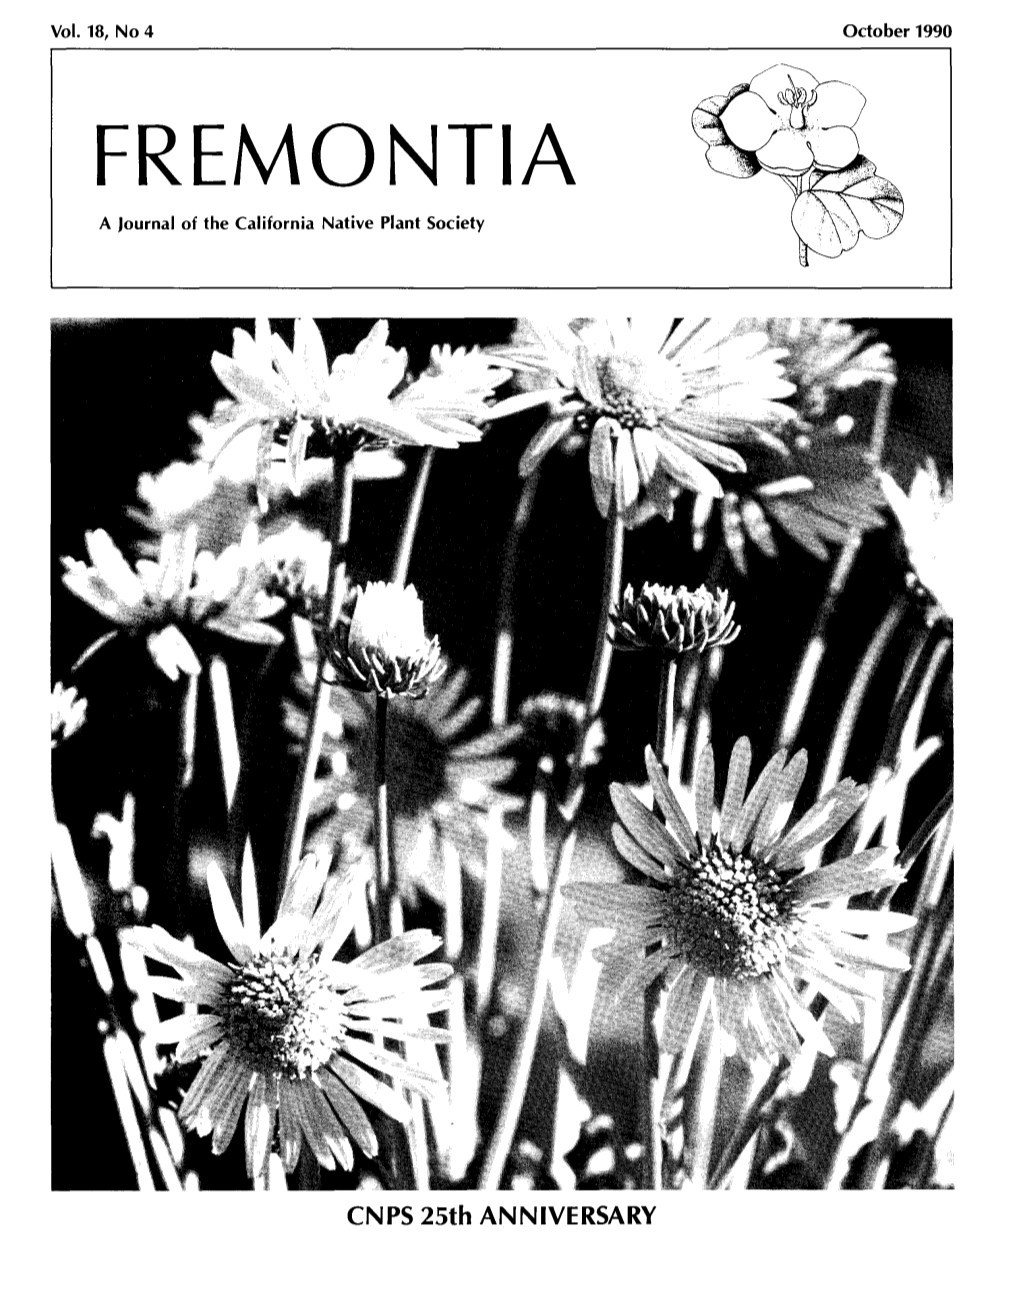 FREMONTIA a Journal of the California Native Plant Society